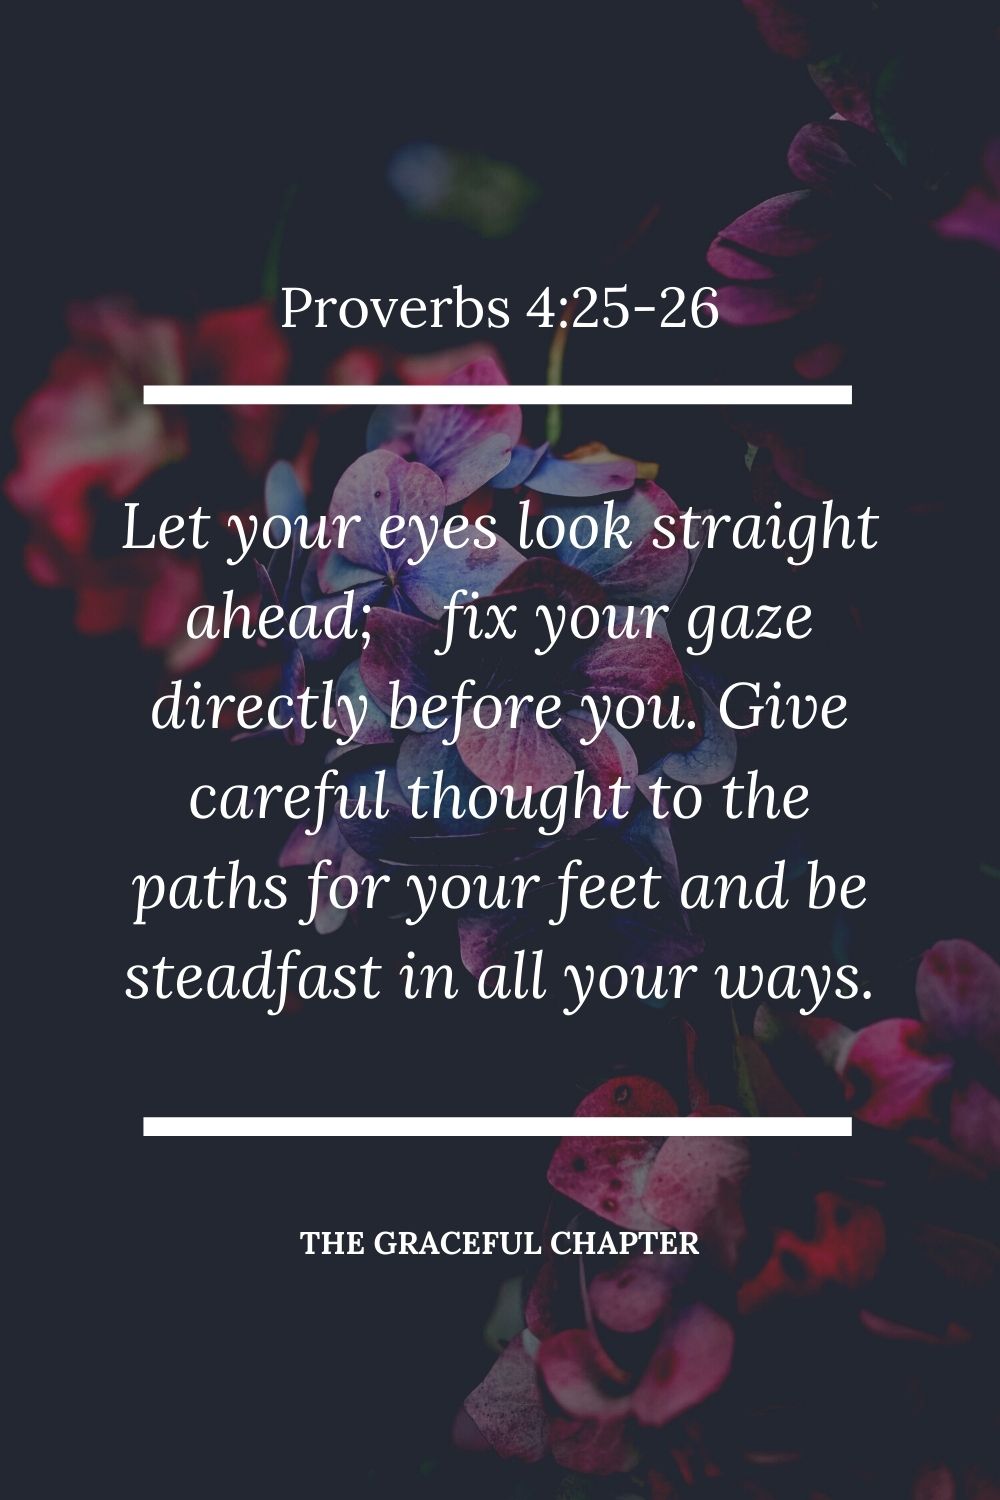 Let your eyes look straight ahead; fix your gaze directly before you. Give careful thought to the paths for your feet and be steadfast in all your ways Proverbs 4:25-26.